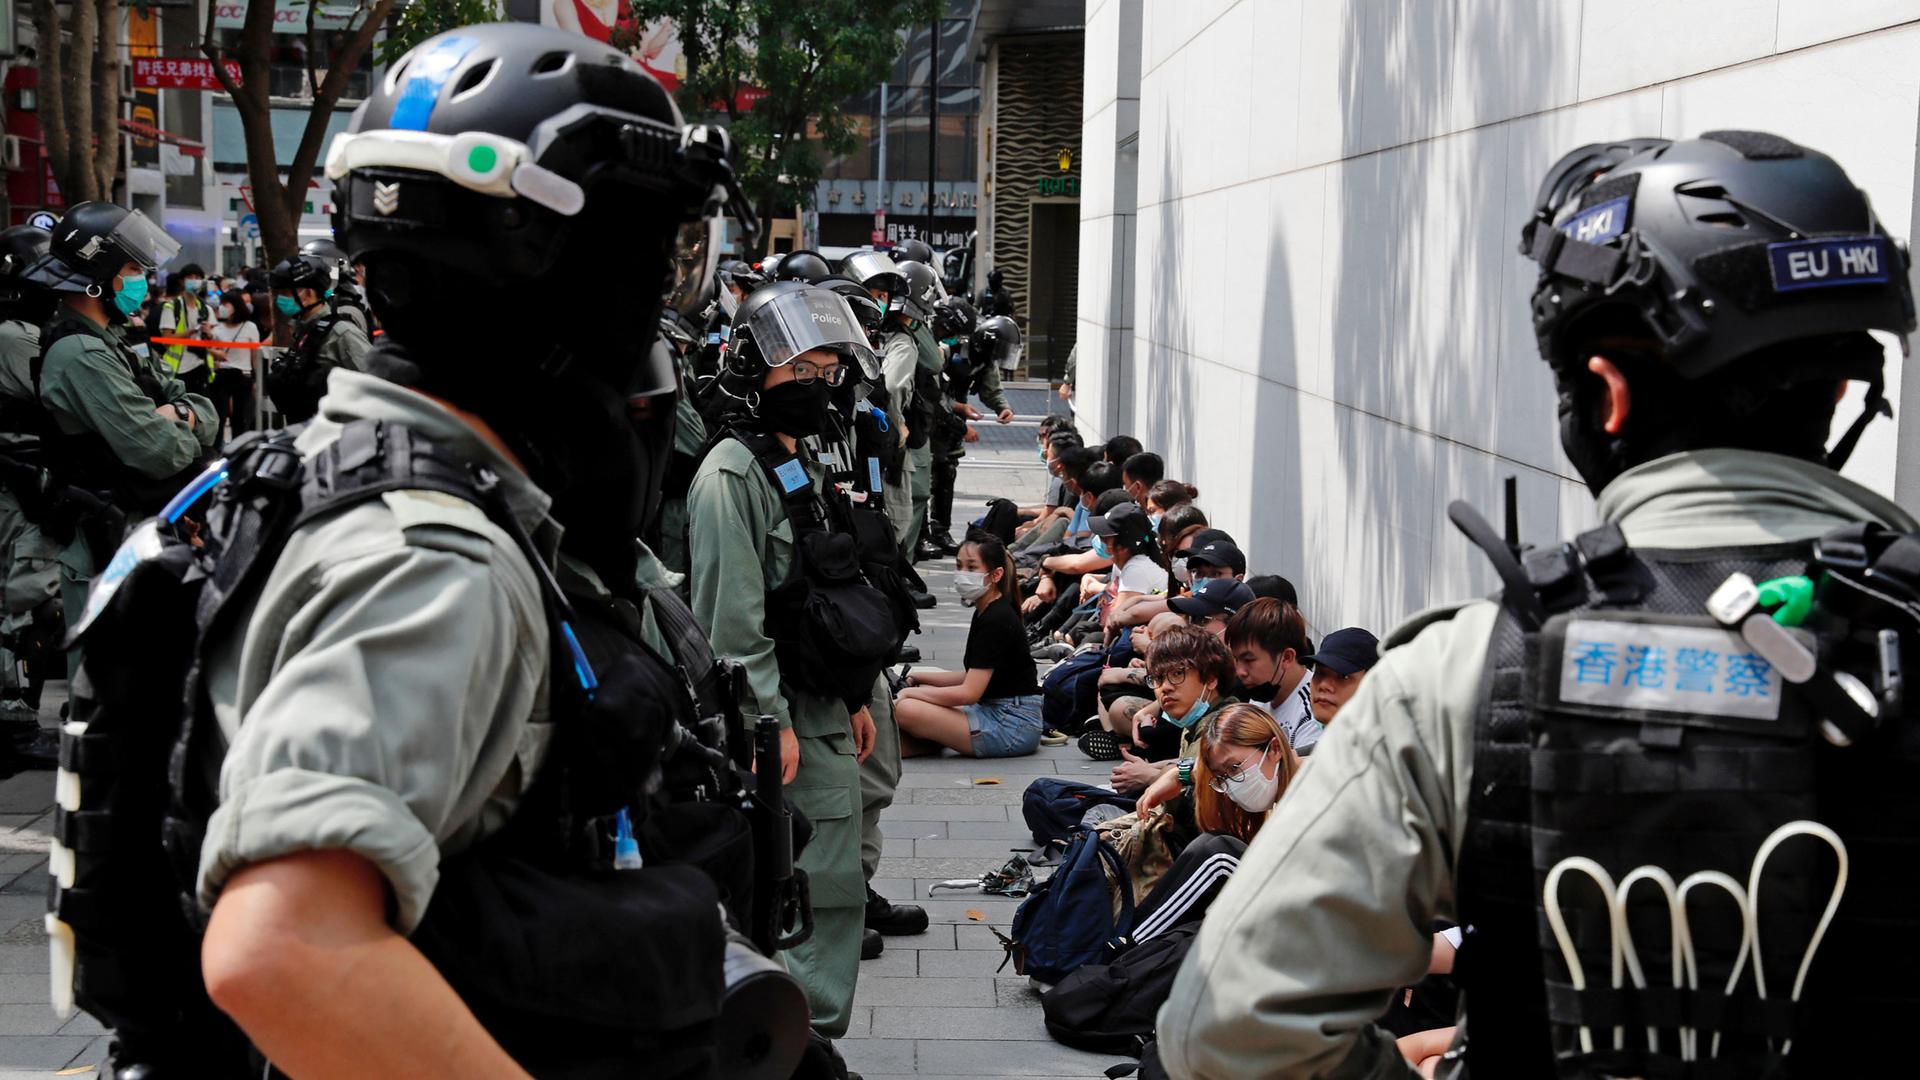 A line of young demonstrators are shown sitting on the ground next to a building with riot police standing in front of them.